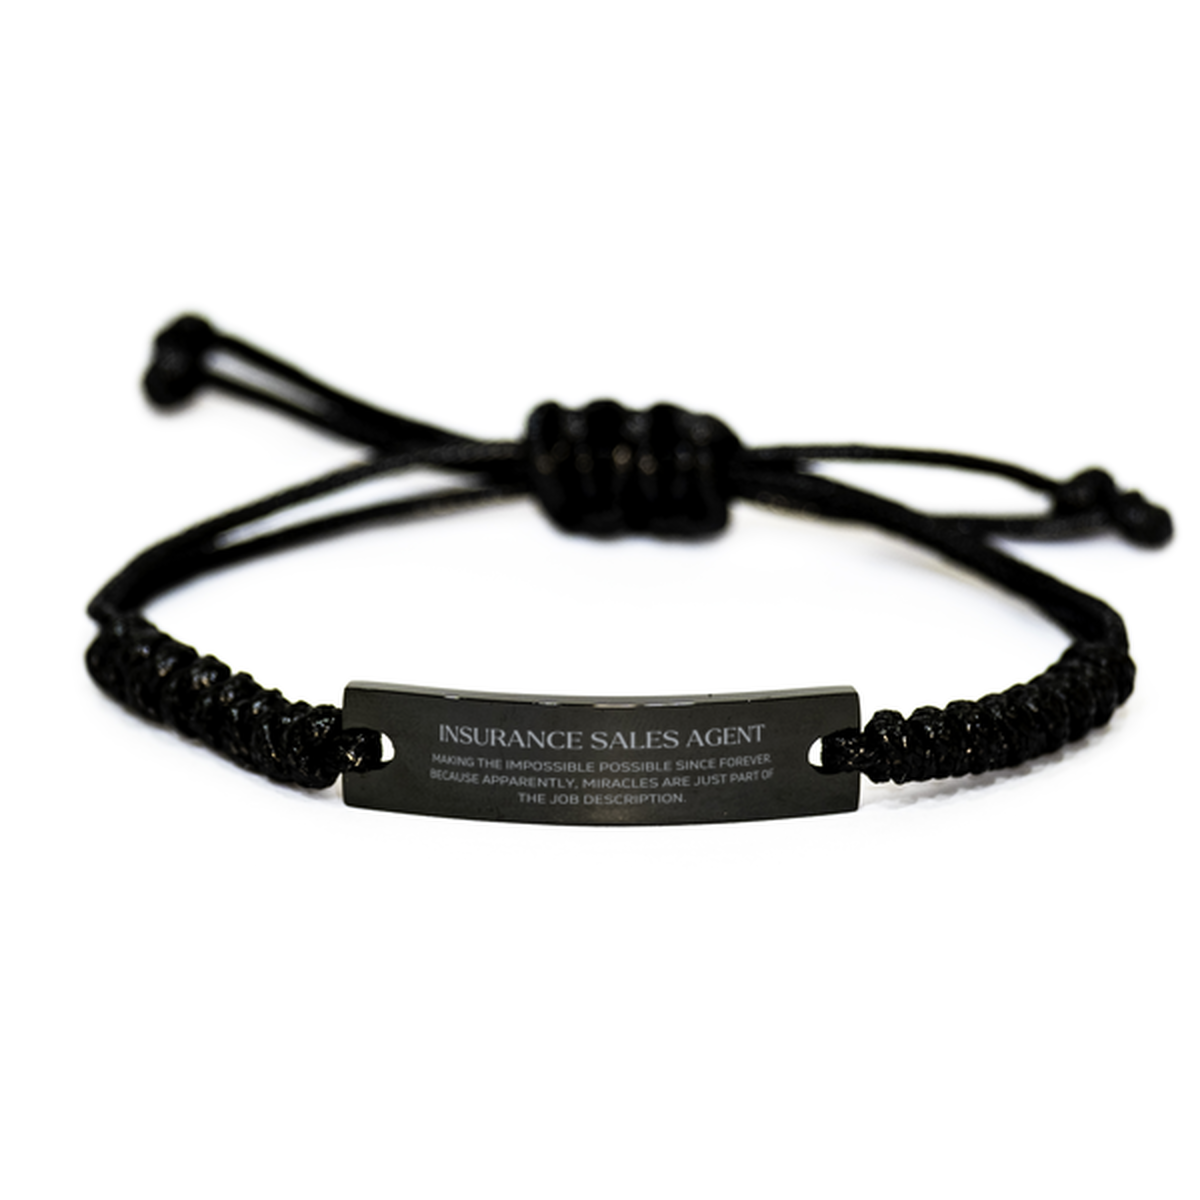 Funny Insurance Sales Agent Gifts, Miracles are just part of the job description, Inspirational Birthday Black Rope Bracelet For Insurance Sales Agent, Men, Women, Coworkers, Friends, Boss